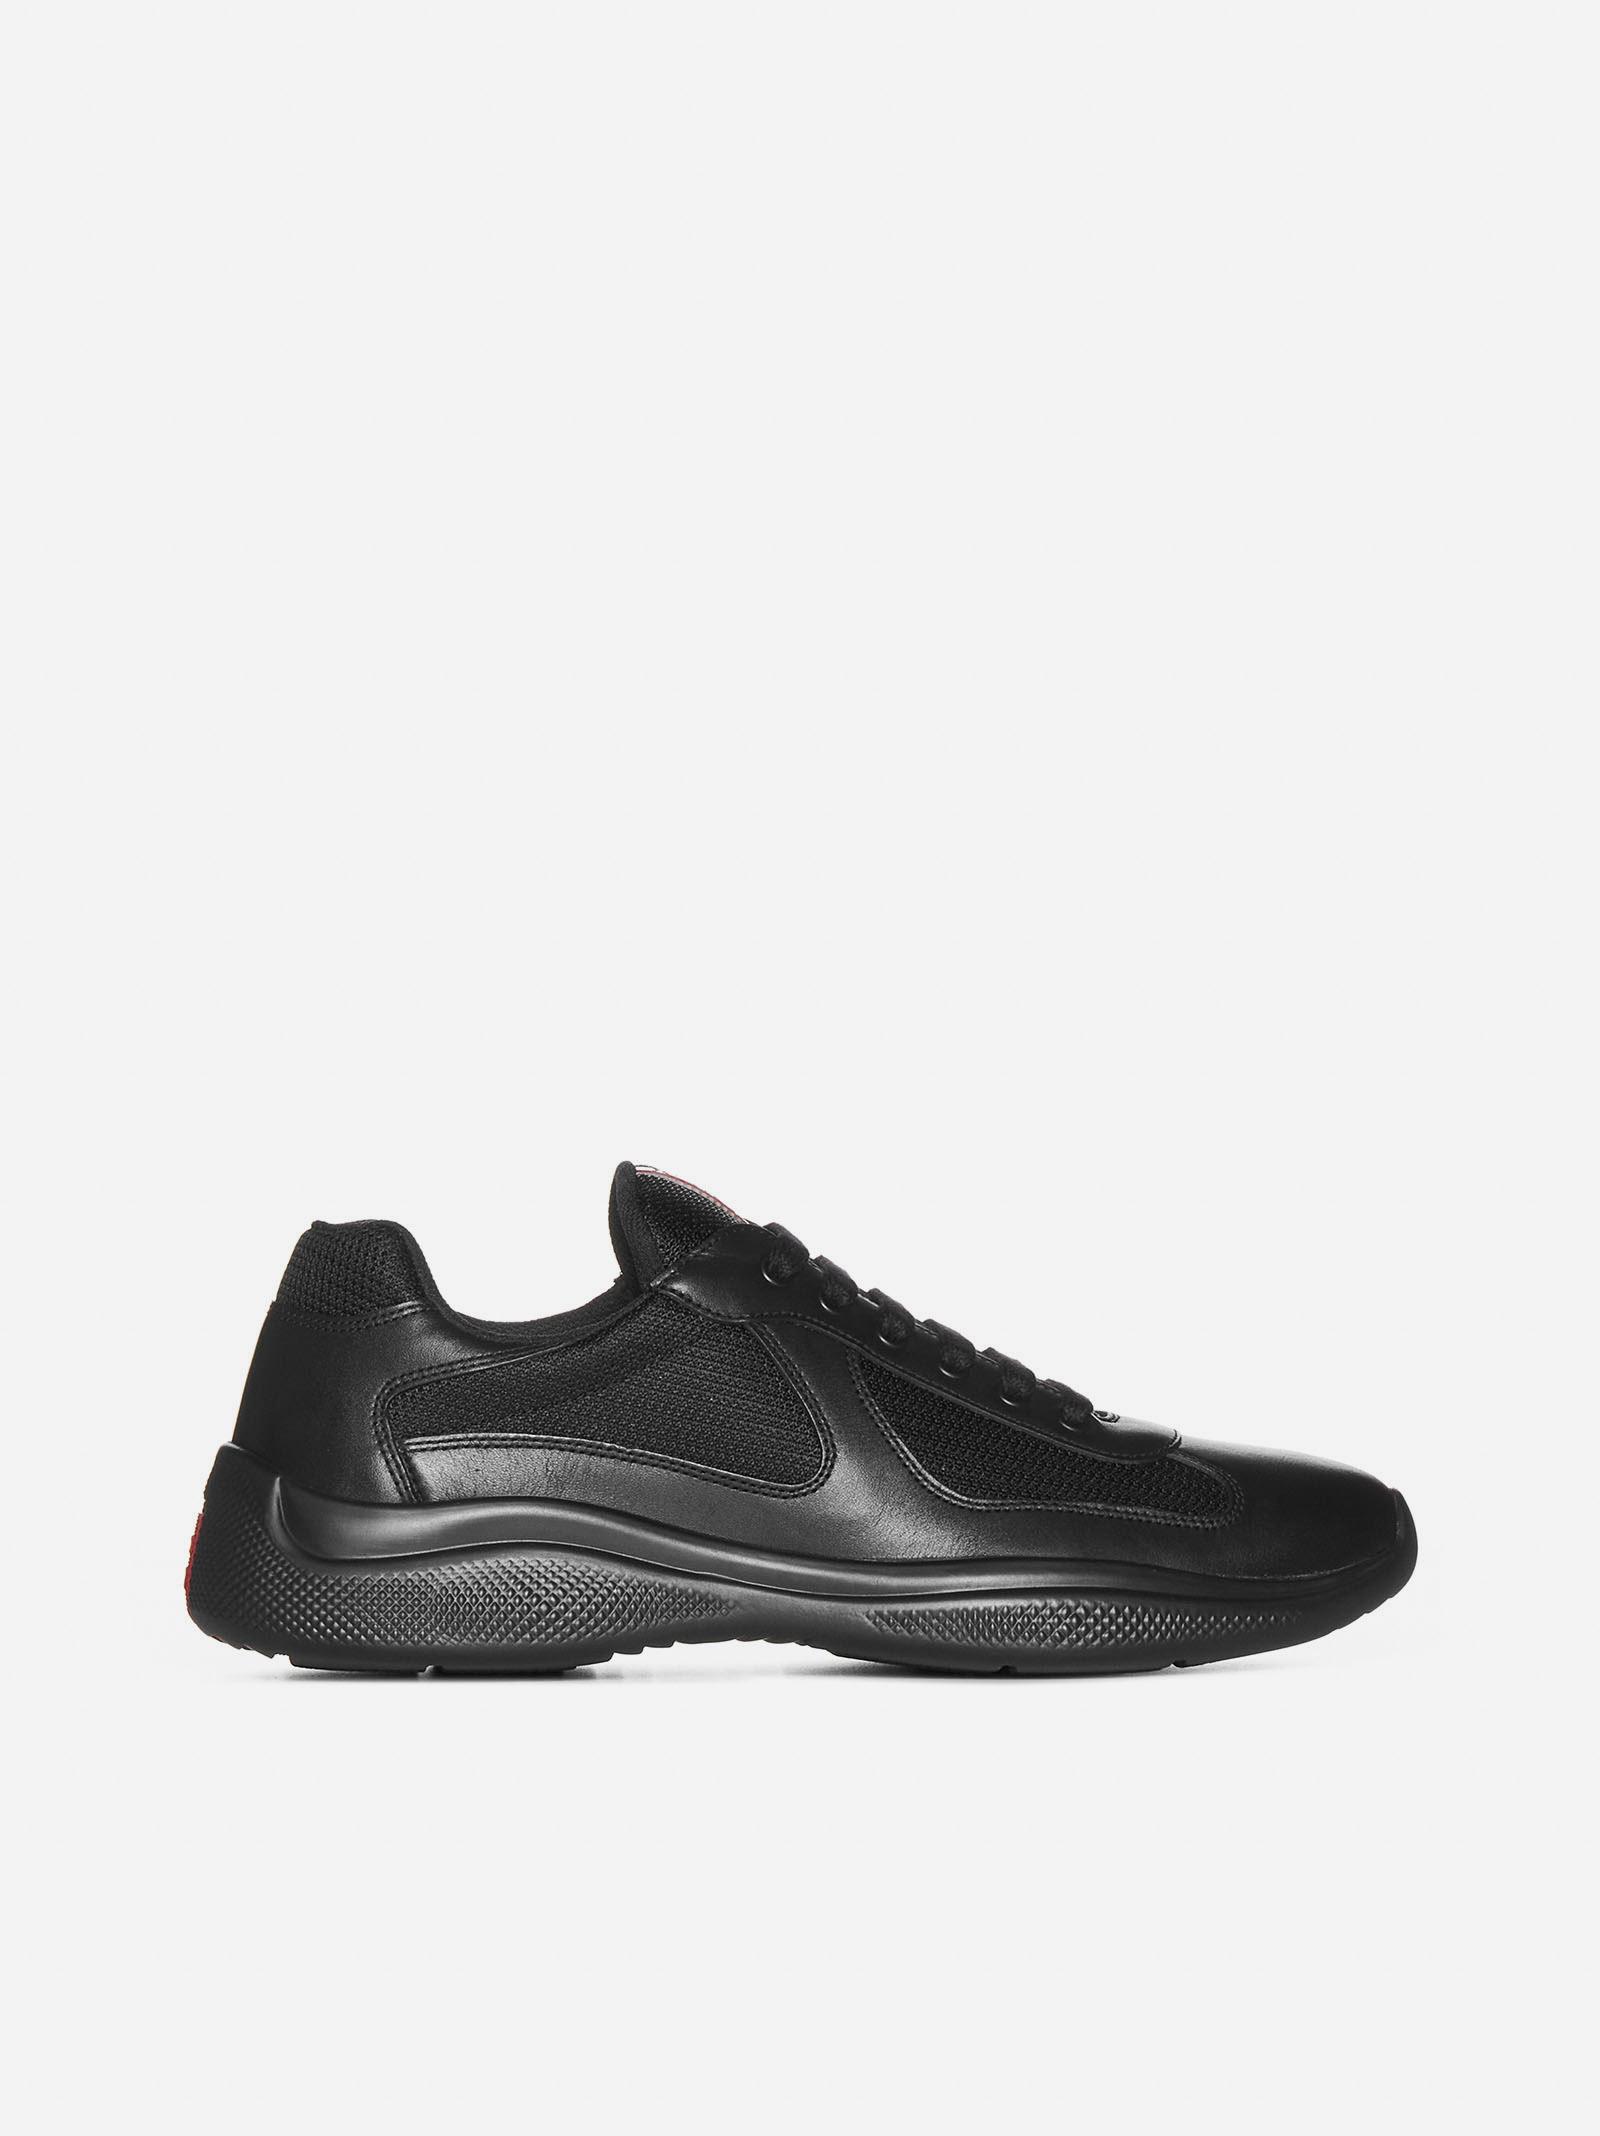 Prada America's Cup Leather And Fabric Sneakers in Black | Lyst